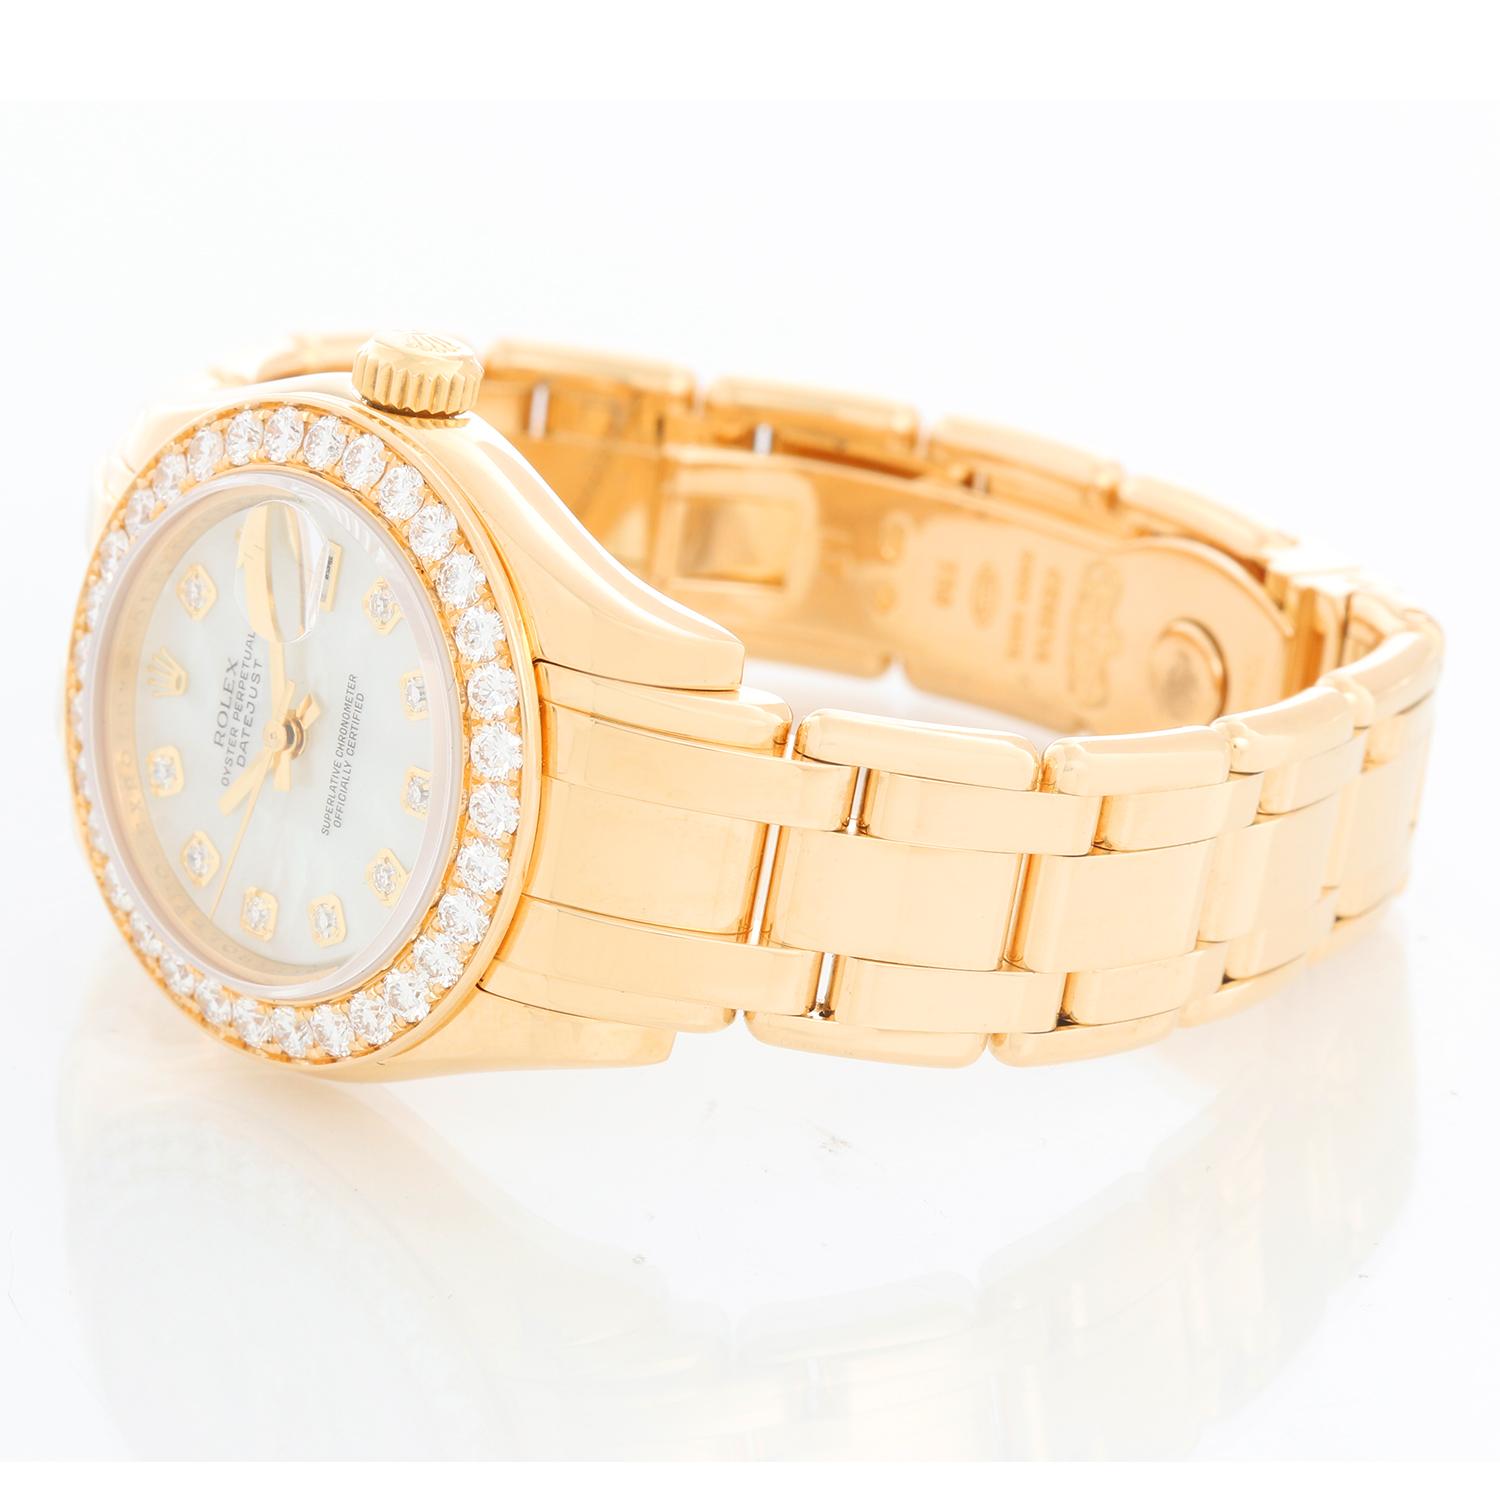 Rolex Ladies Masterpiece/Pearlmaster Gold Diamond Watch 80298 - Automatic winding, 31 jewels, Quickset, sapphire crystal. 18k yellow gold case with full factory diamond bezel. Factory Mother of Pearl dial with diamond hour markers. Pearlmaster